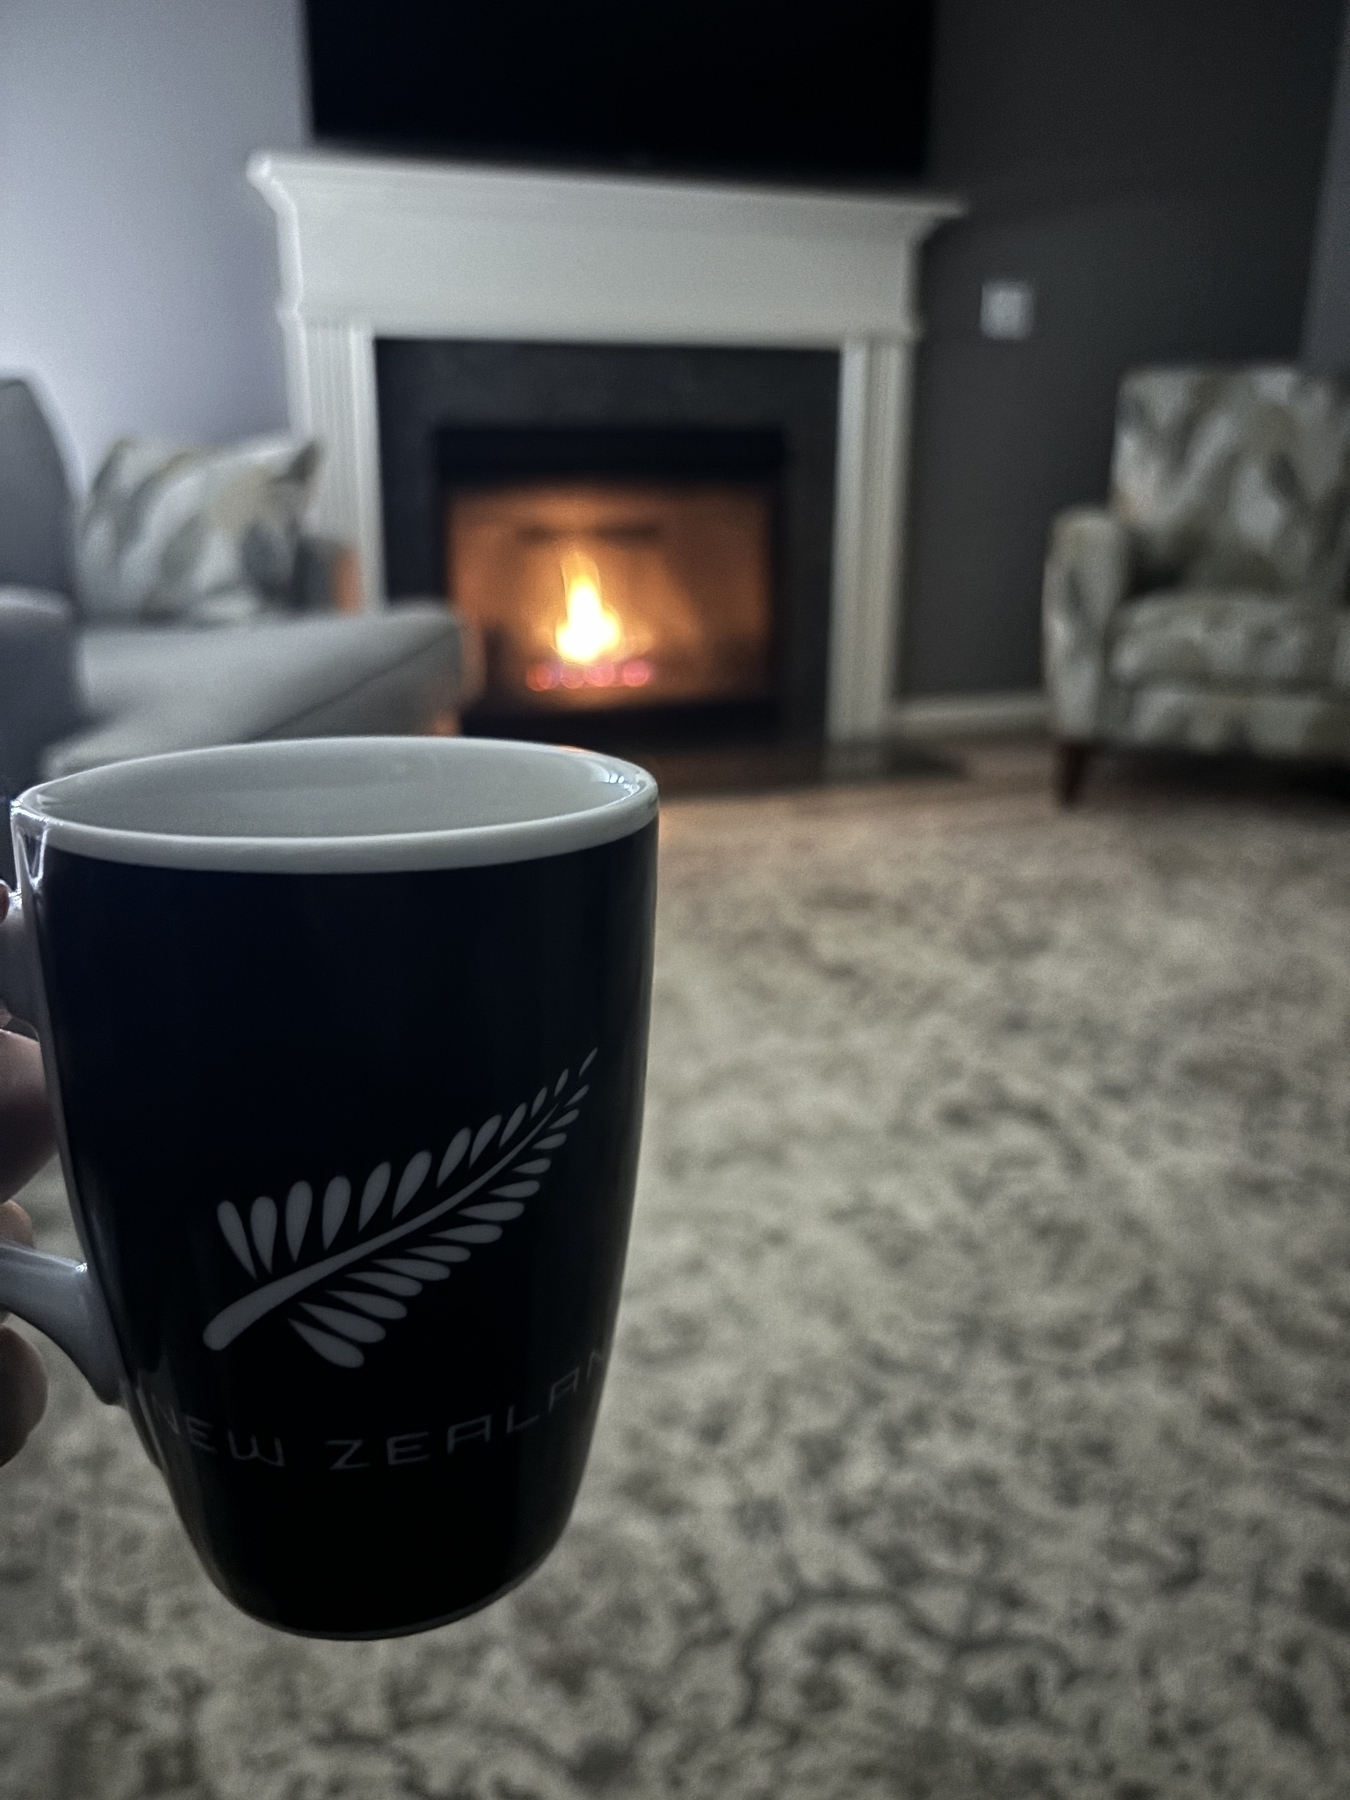 A coffee mug that reads, “New Zealand” in front of a fireplace with an inviting fire. 